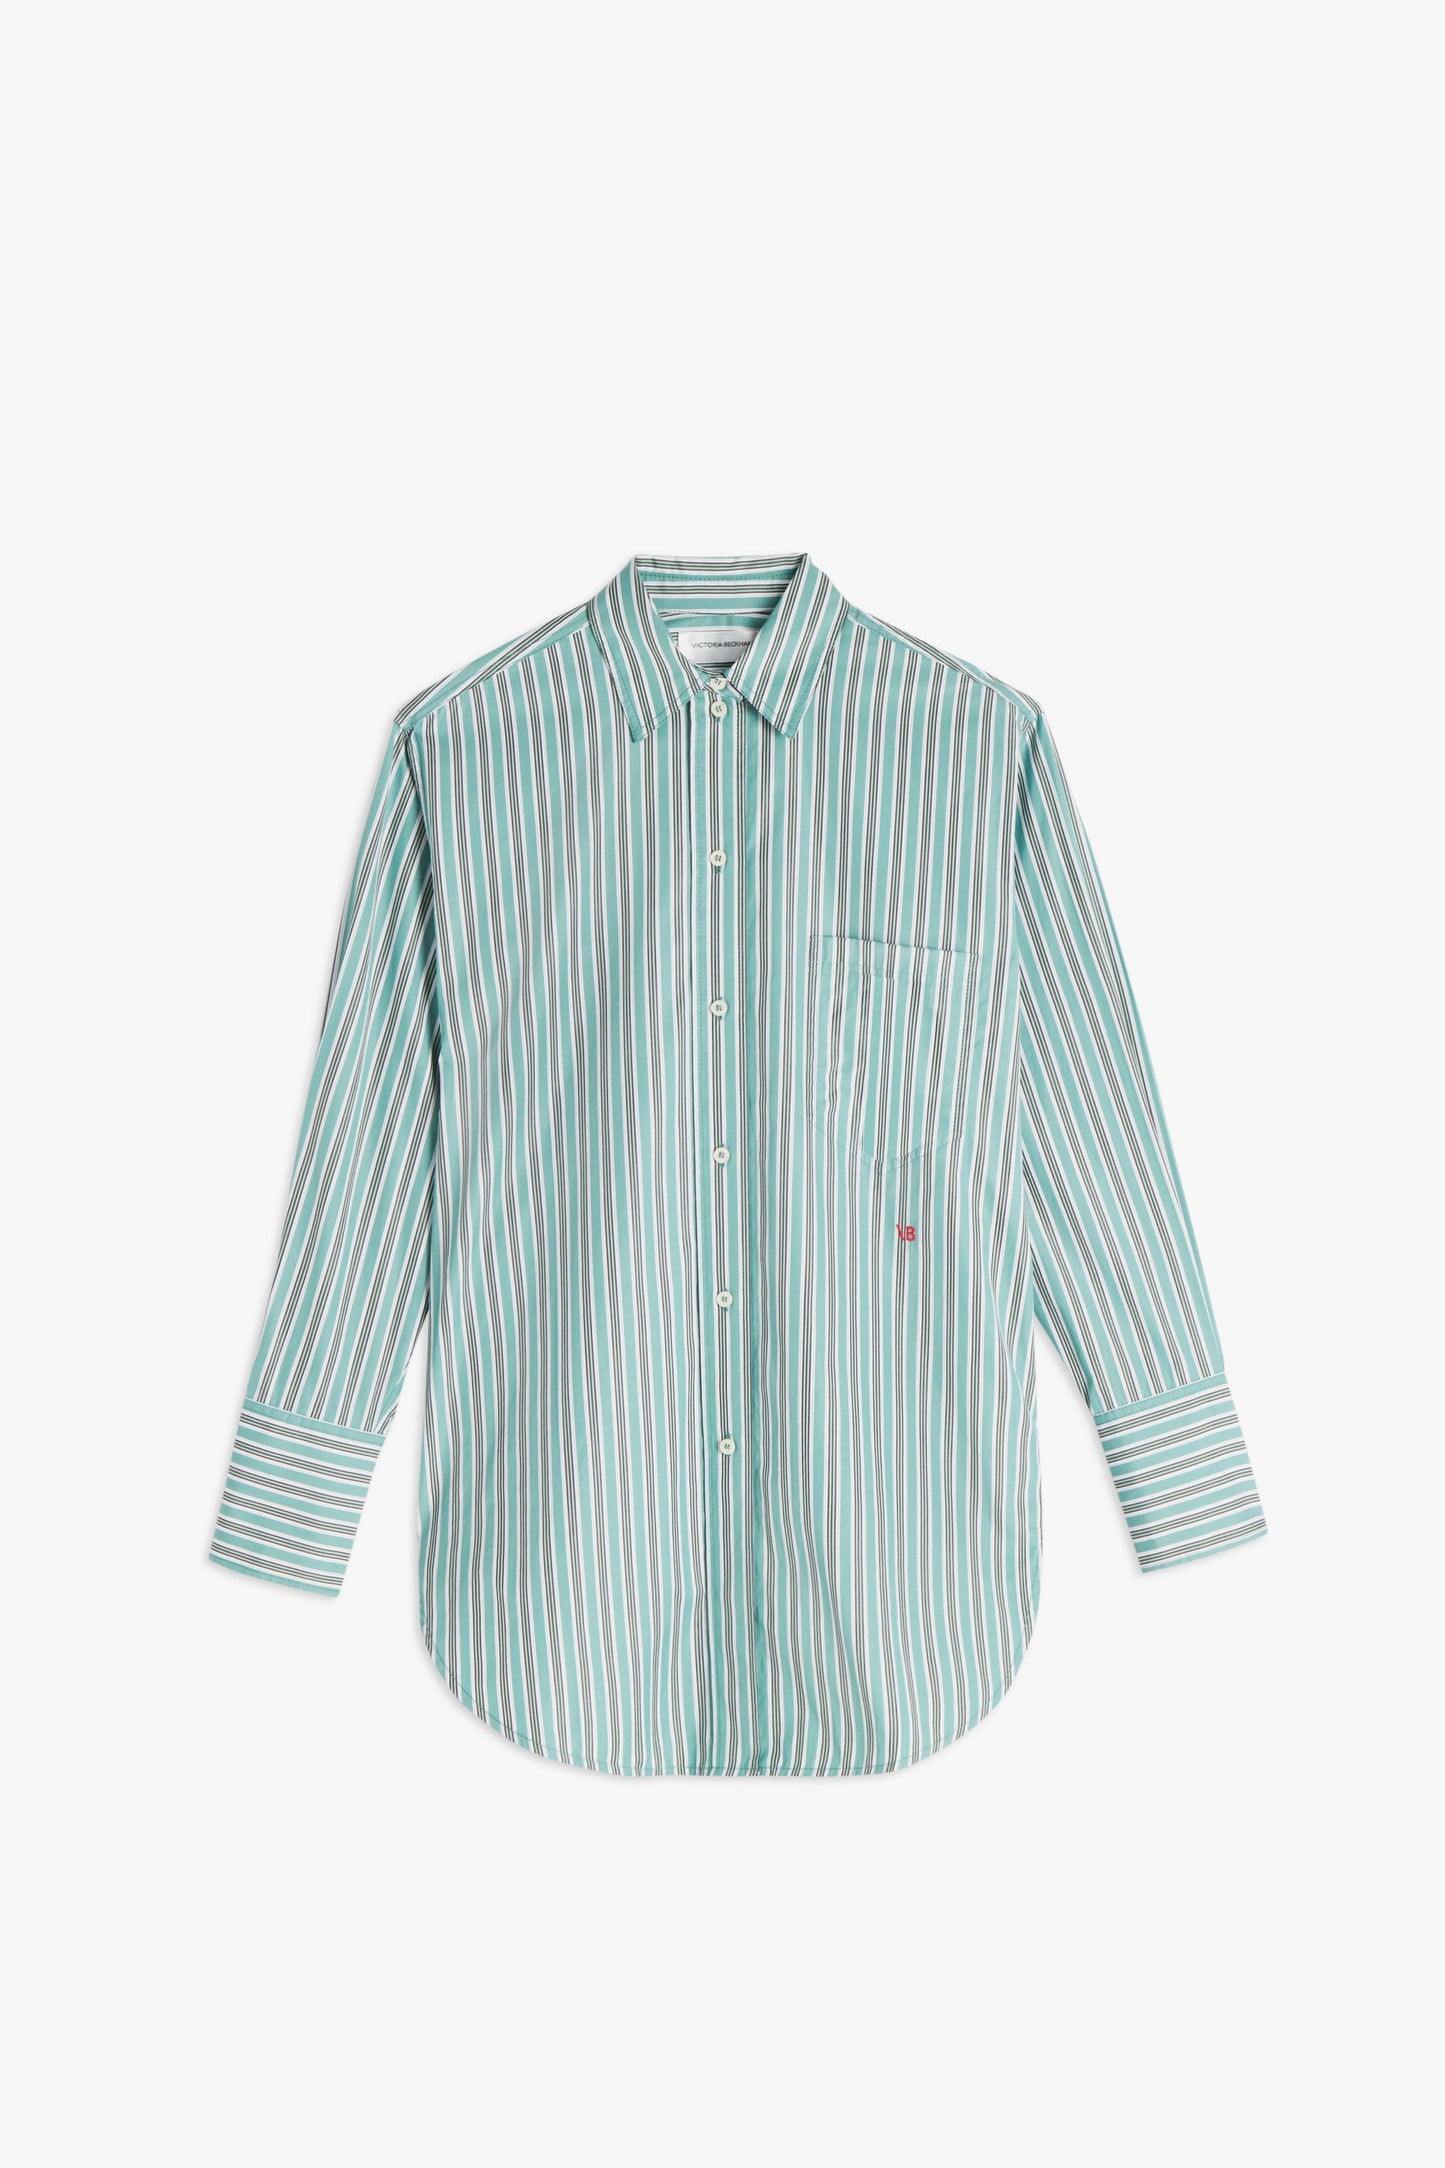 Patch Pocket Shirt in Peppermint